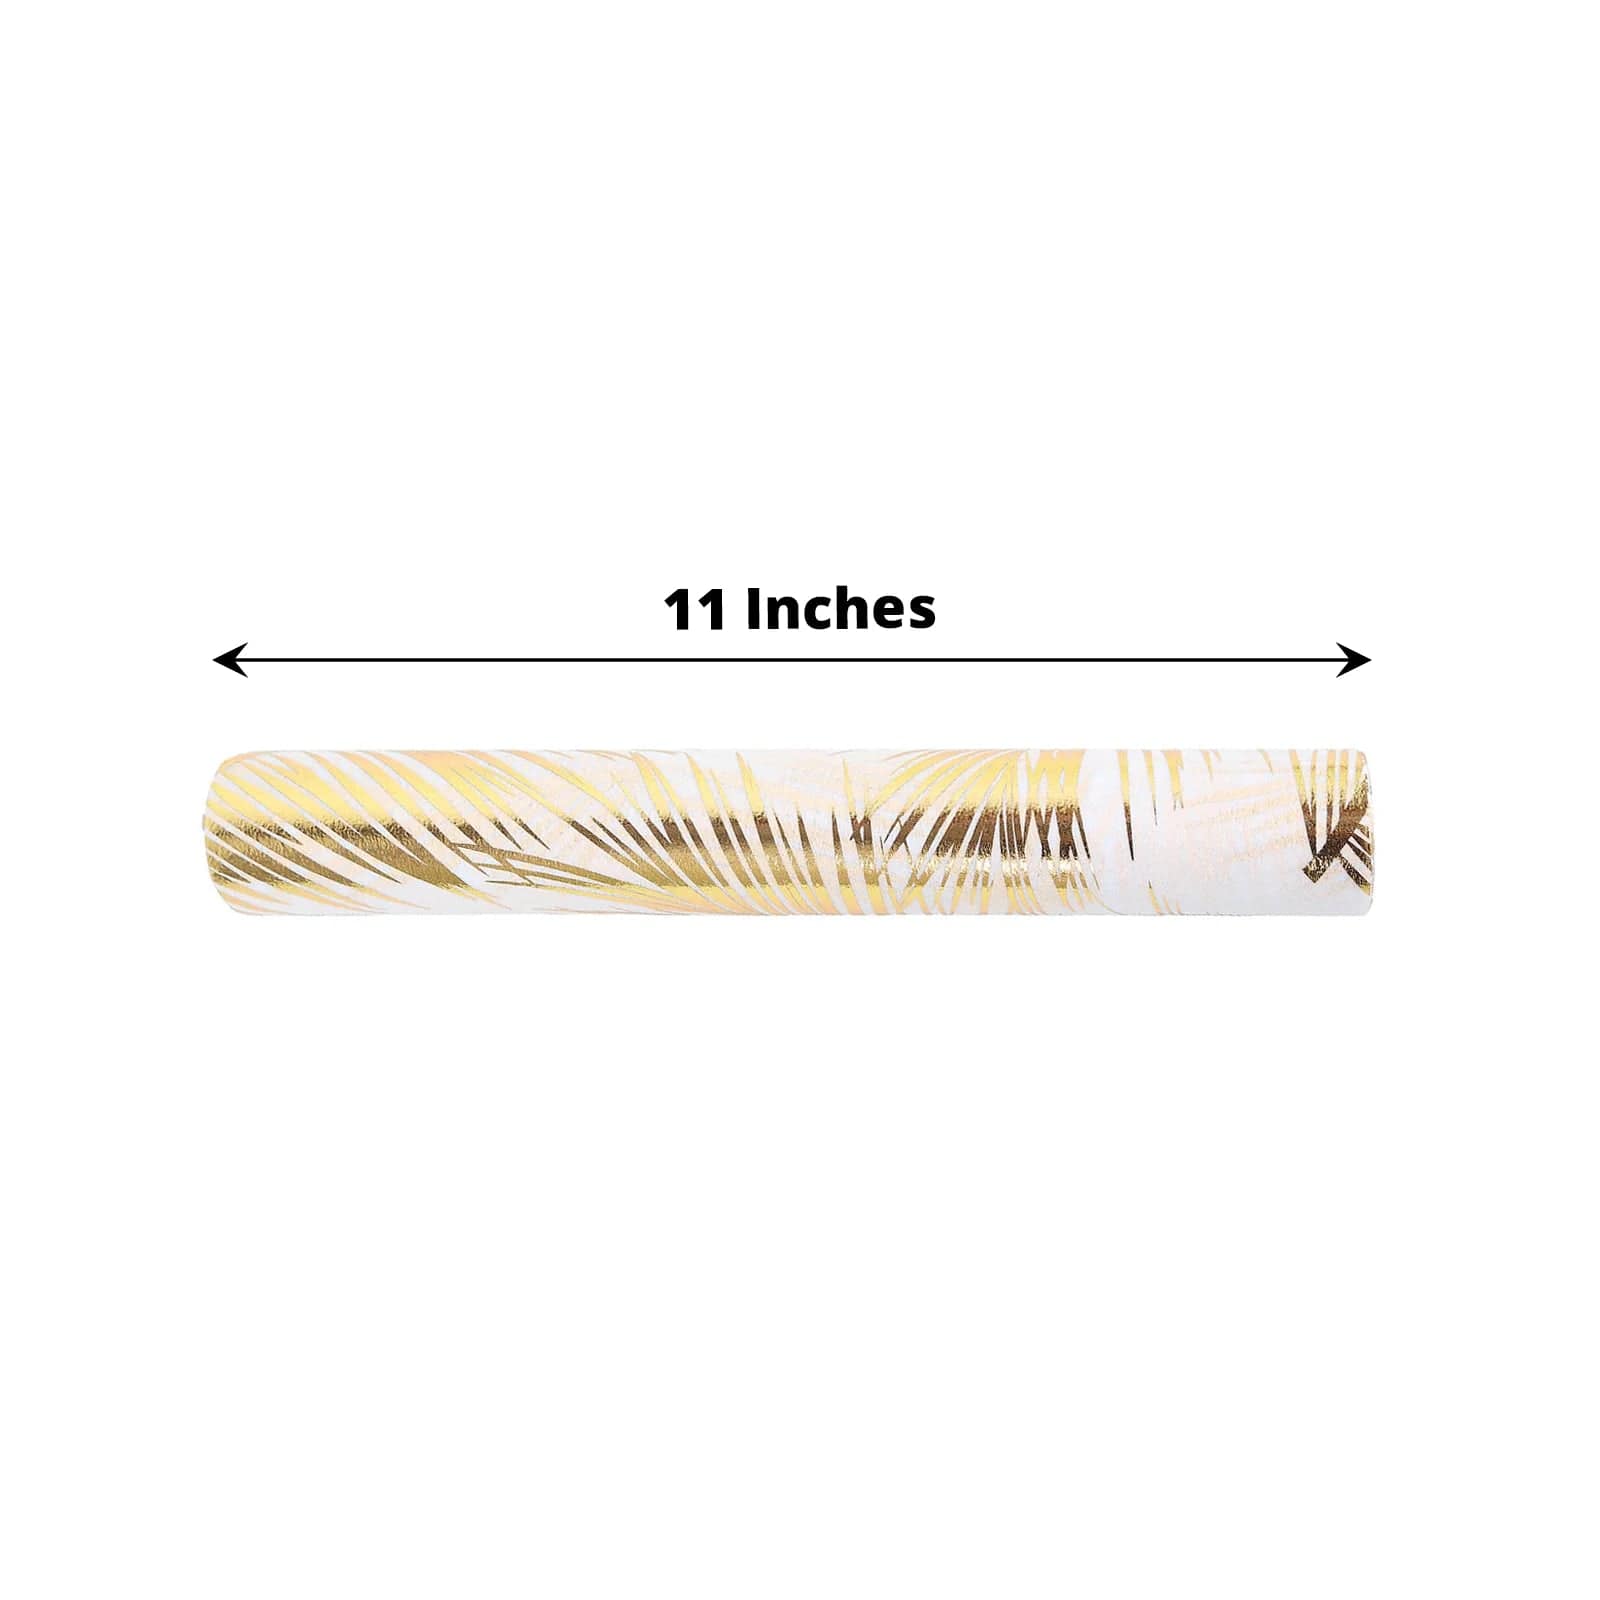 White 11x108 in Non Woven Fabric Table Runner with Gold Metallic Leaves Print